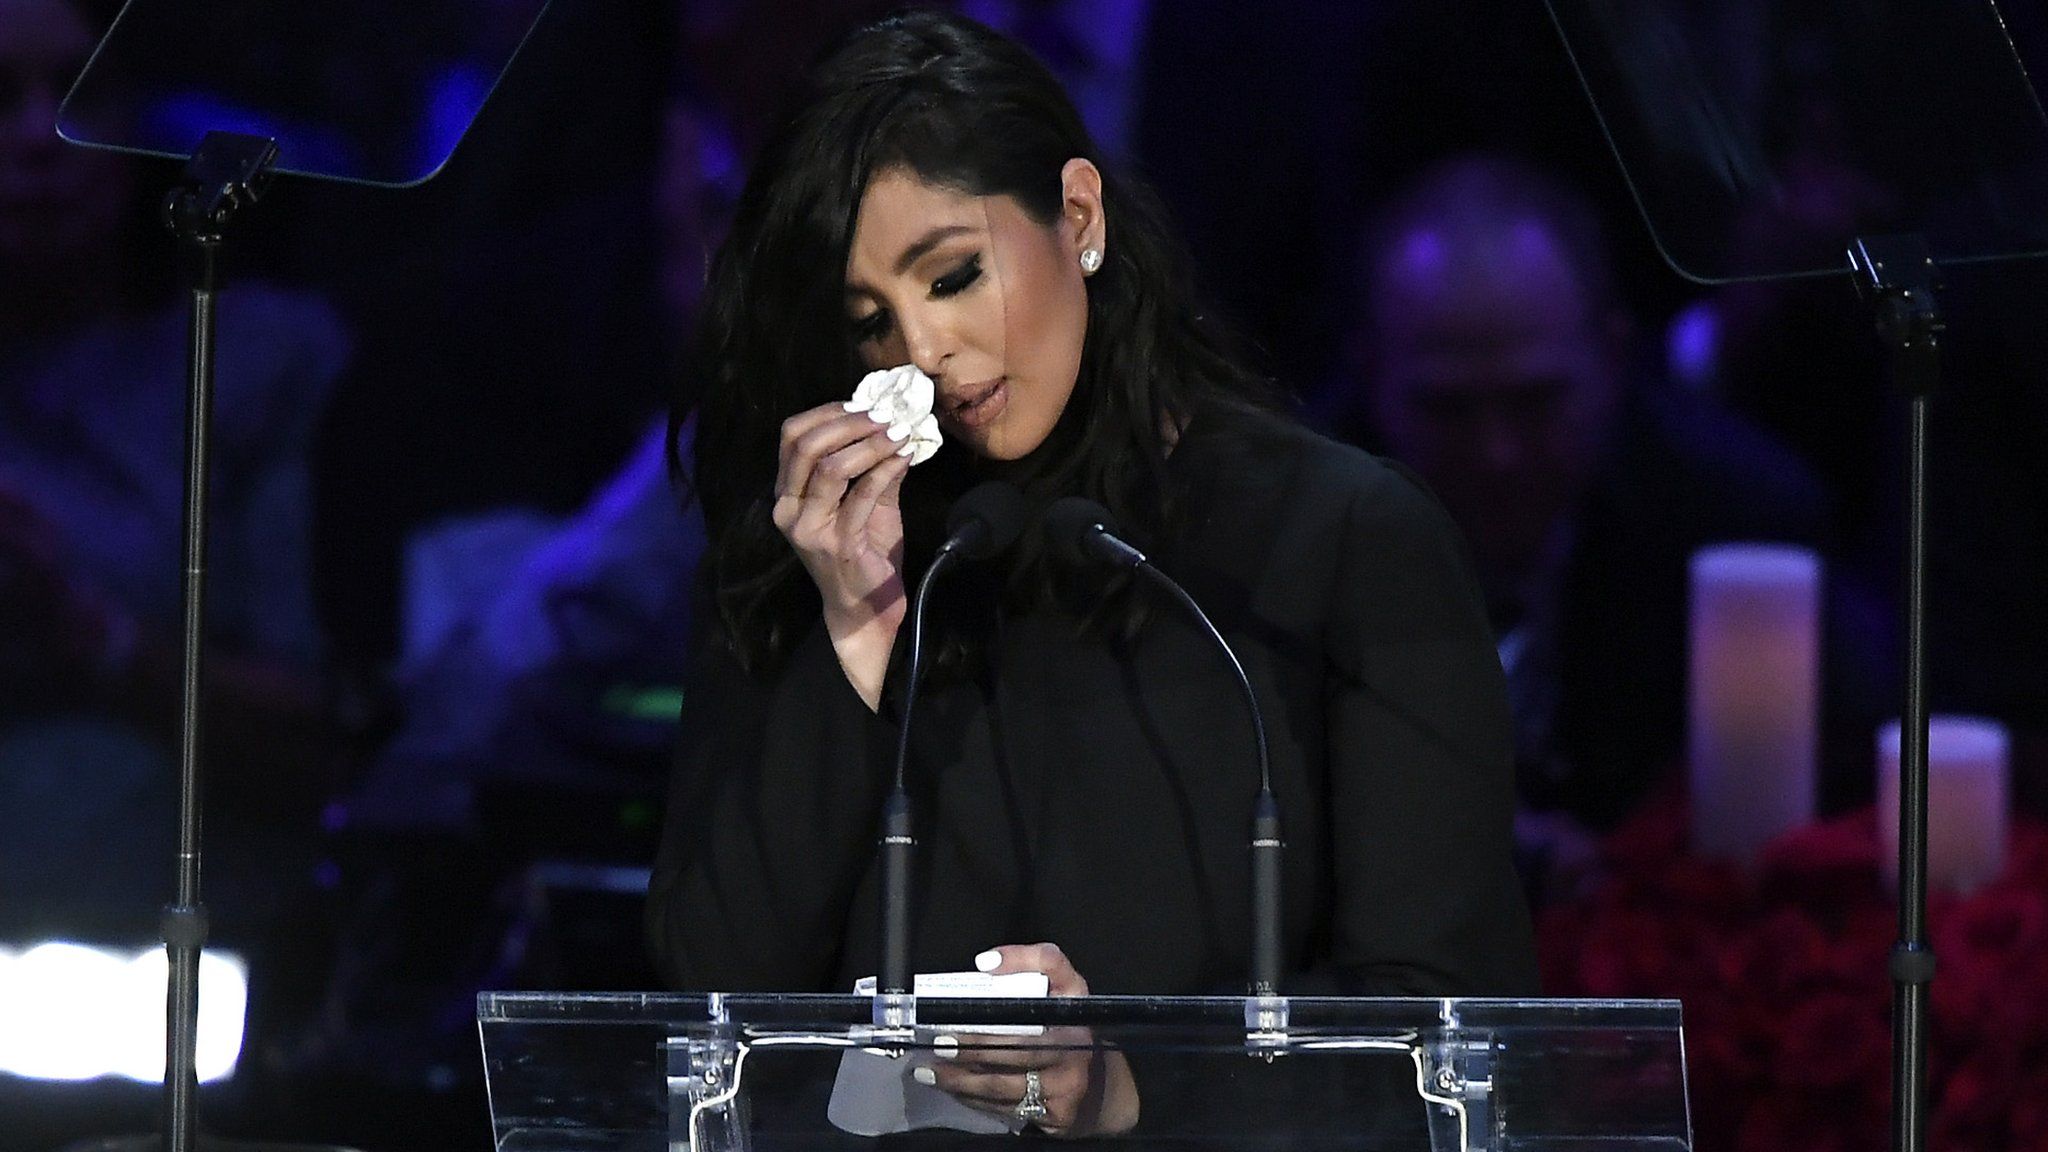 Vanessa Bryant wipes a tear as she delivers a speech at the memorial for her late husband Kobe Bryant and daughter Gianna